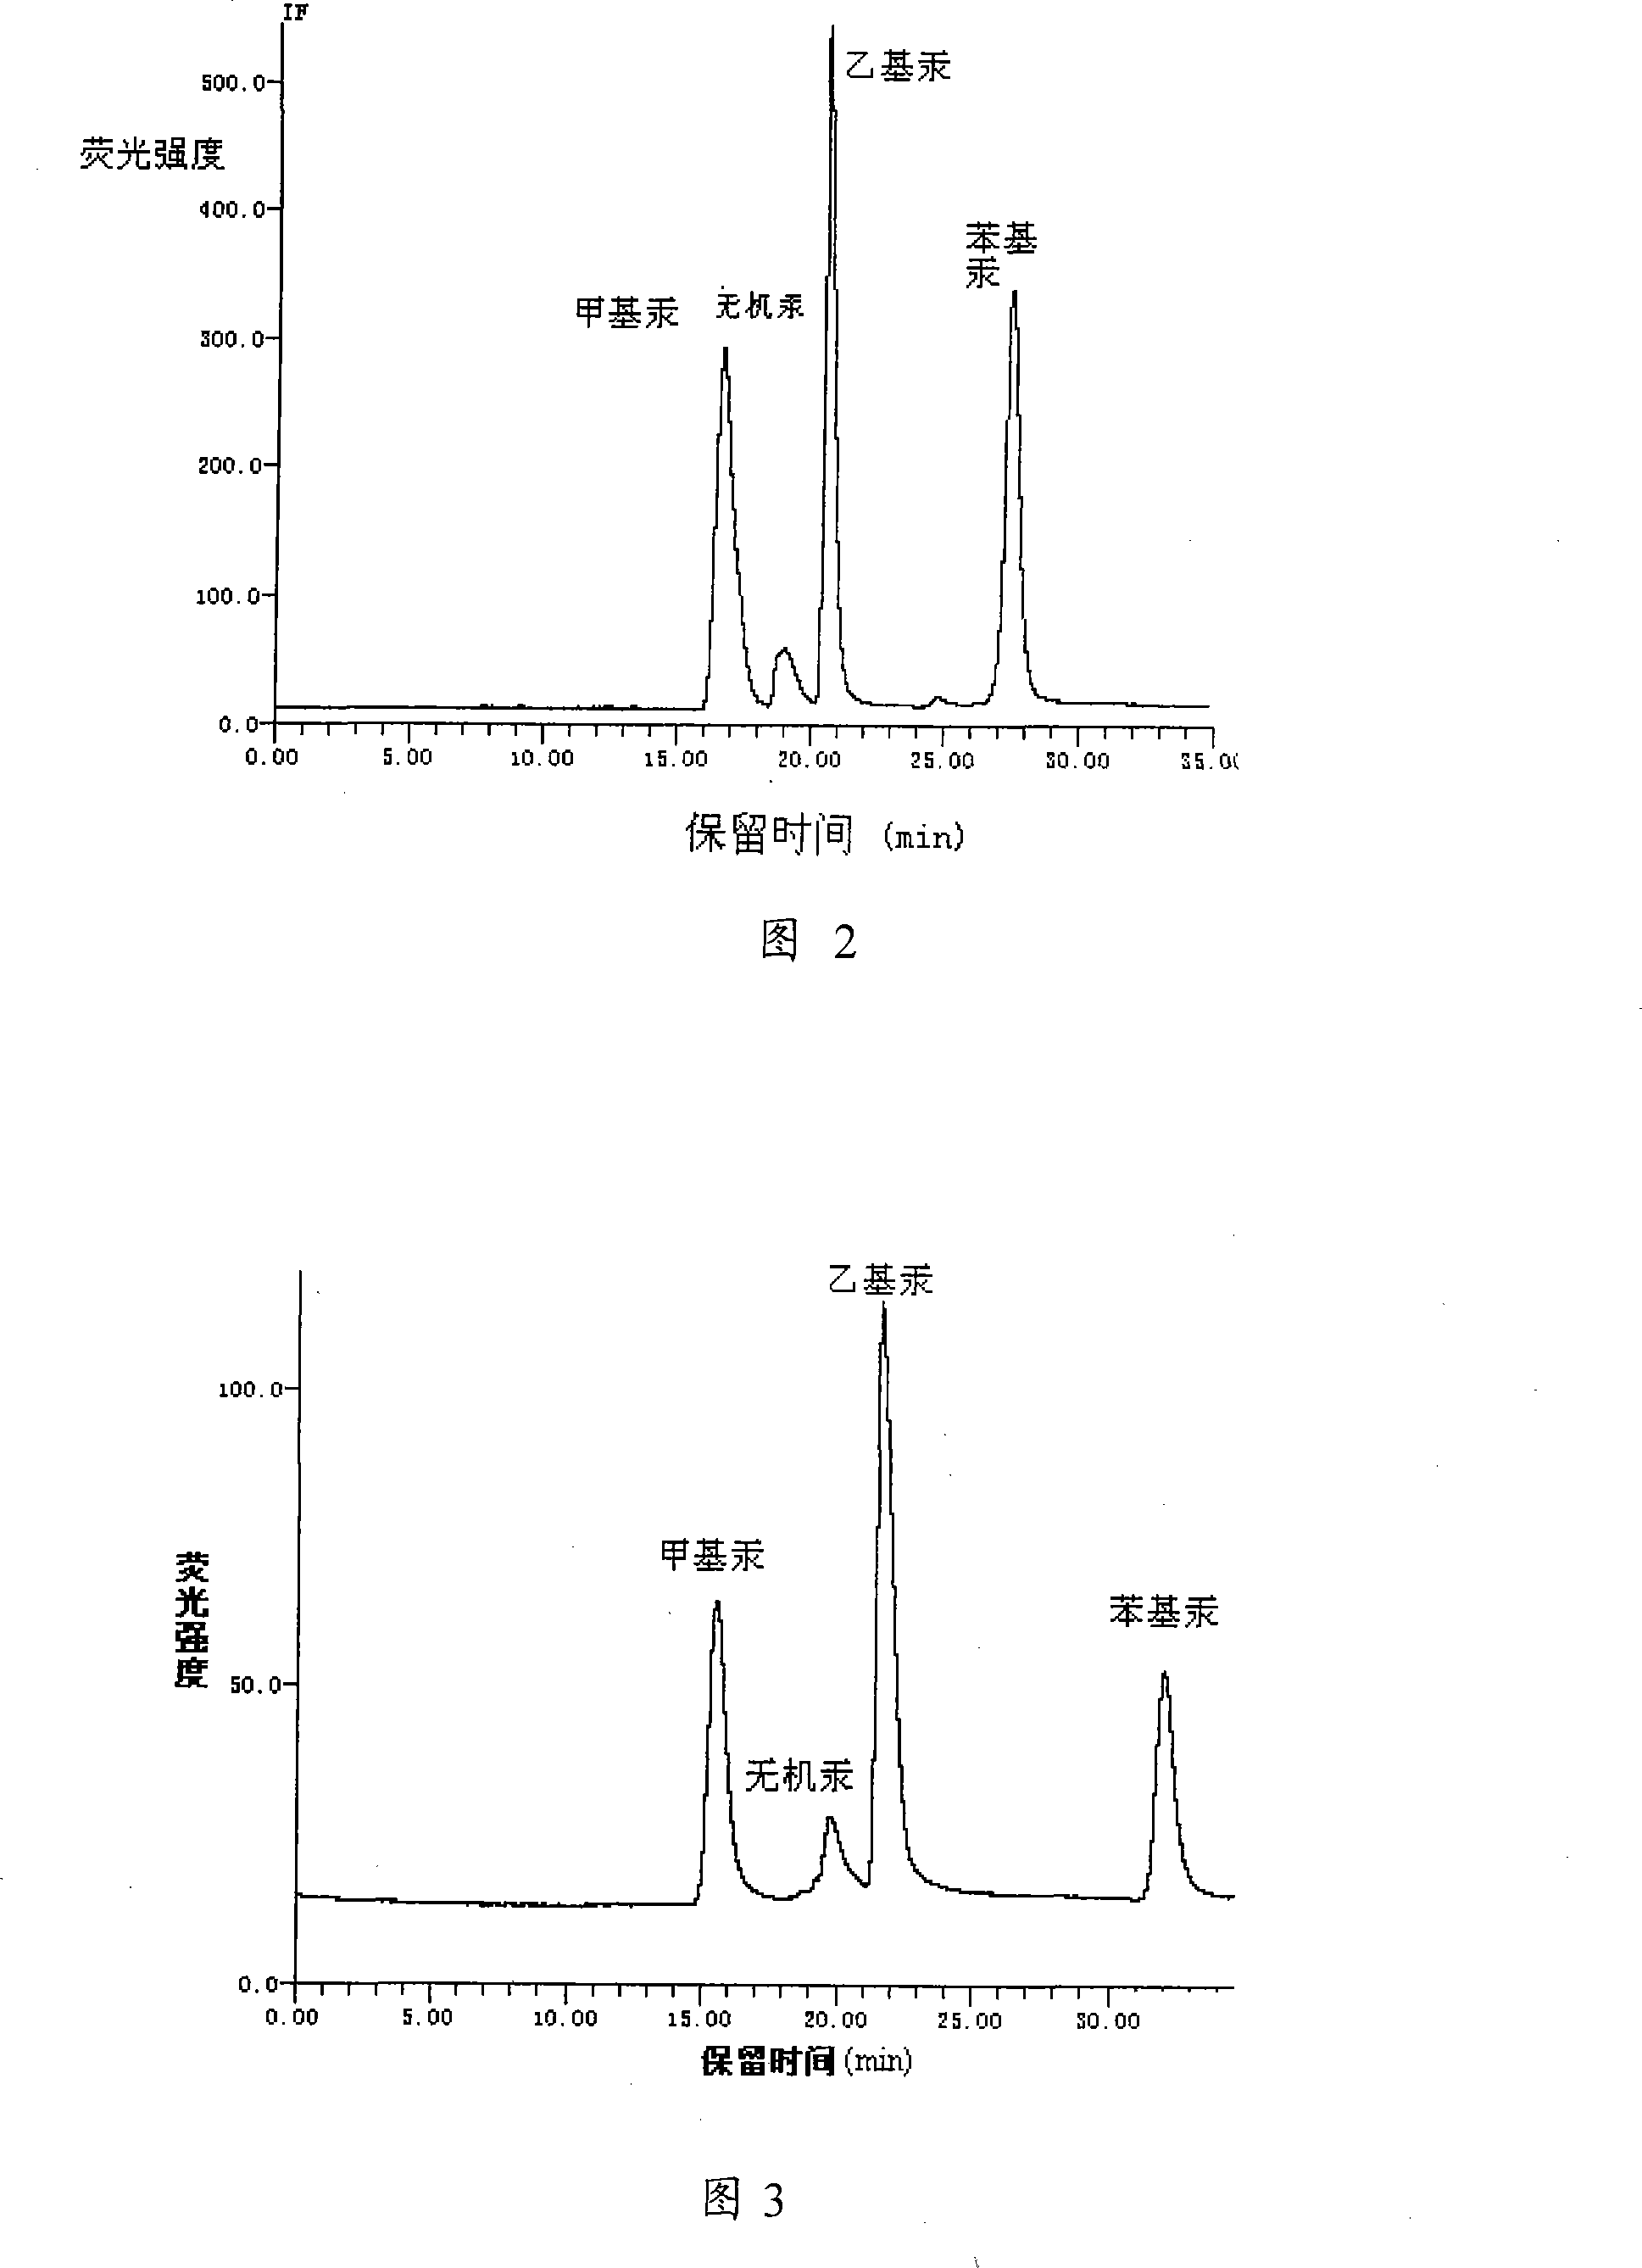 Method and equipment for separating and detecting organo-mercuric compound content